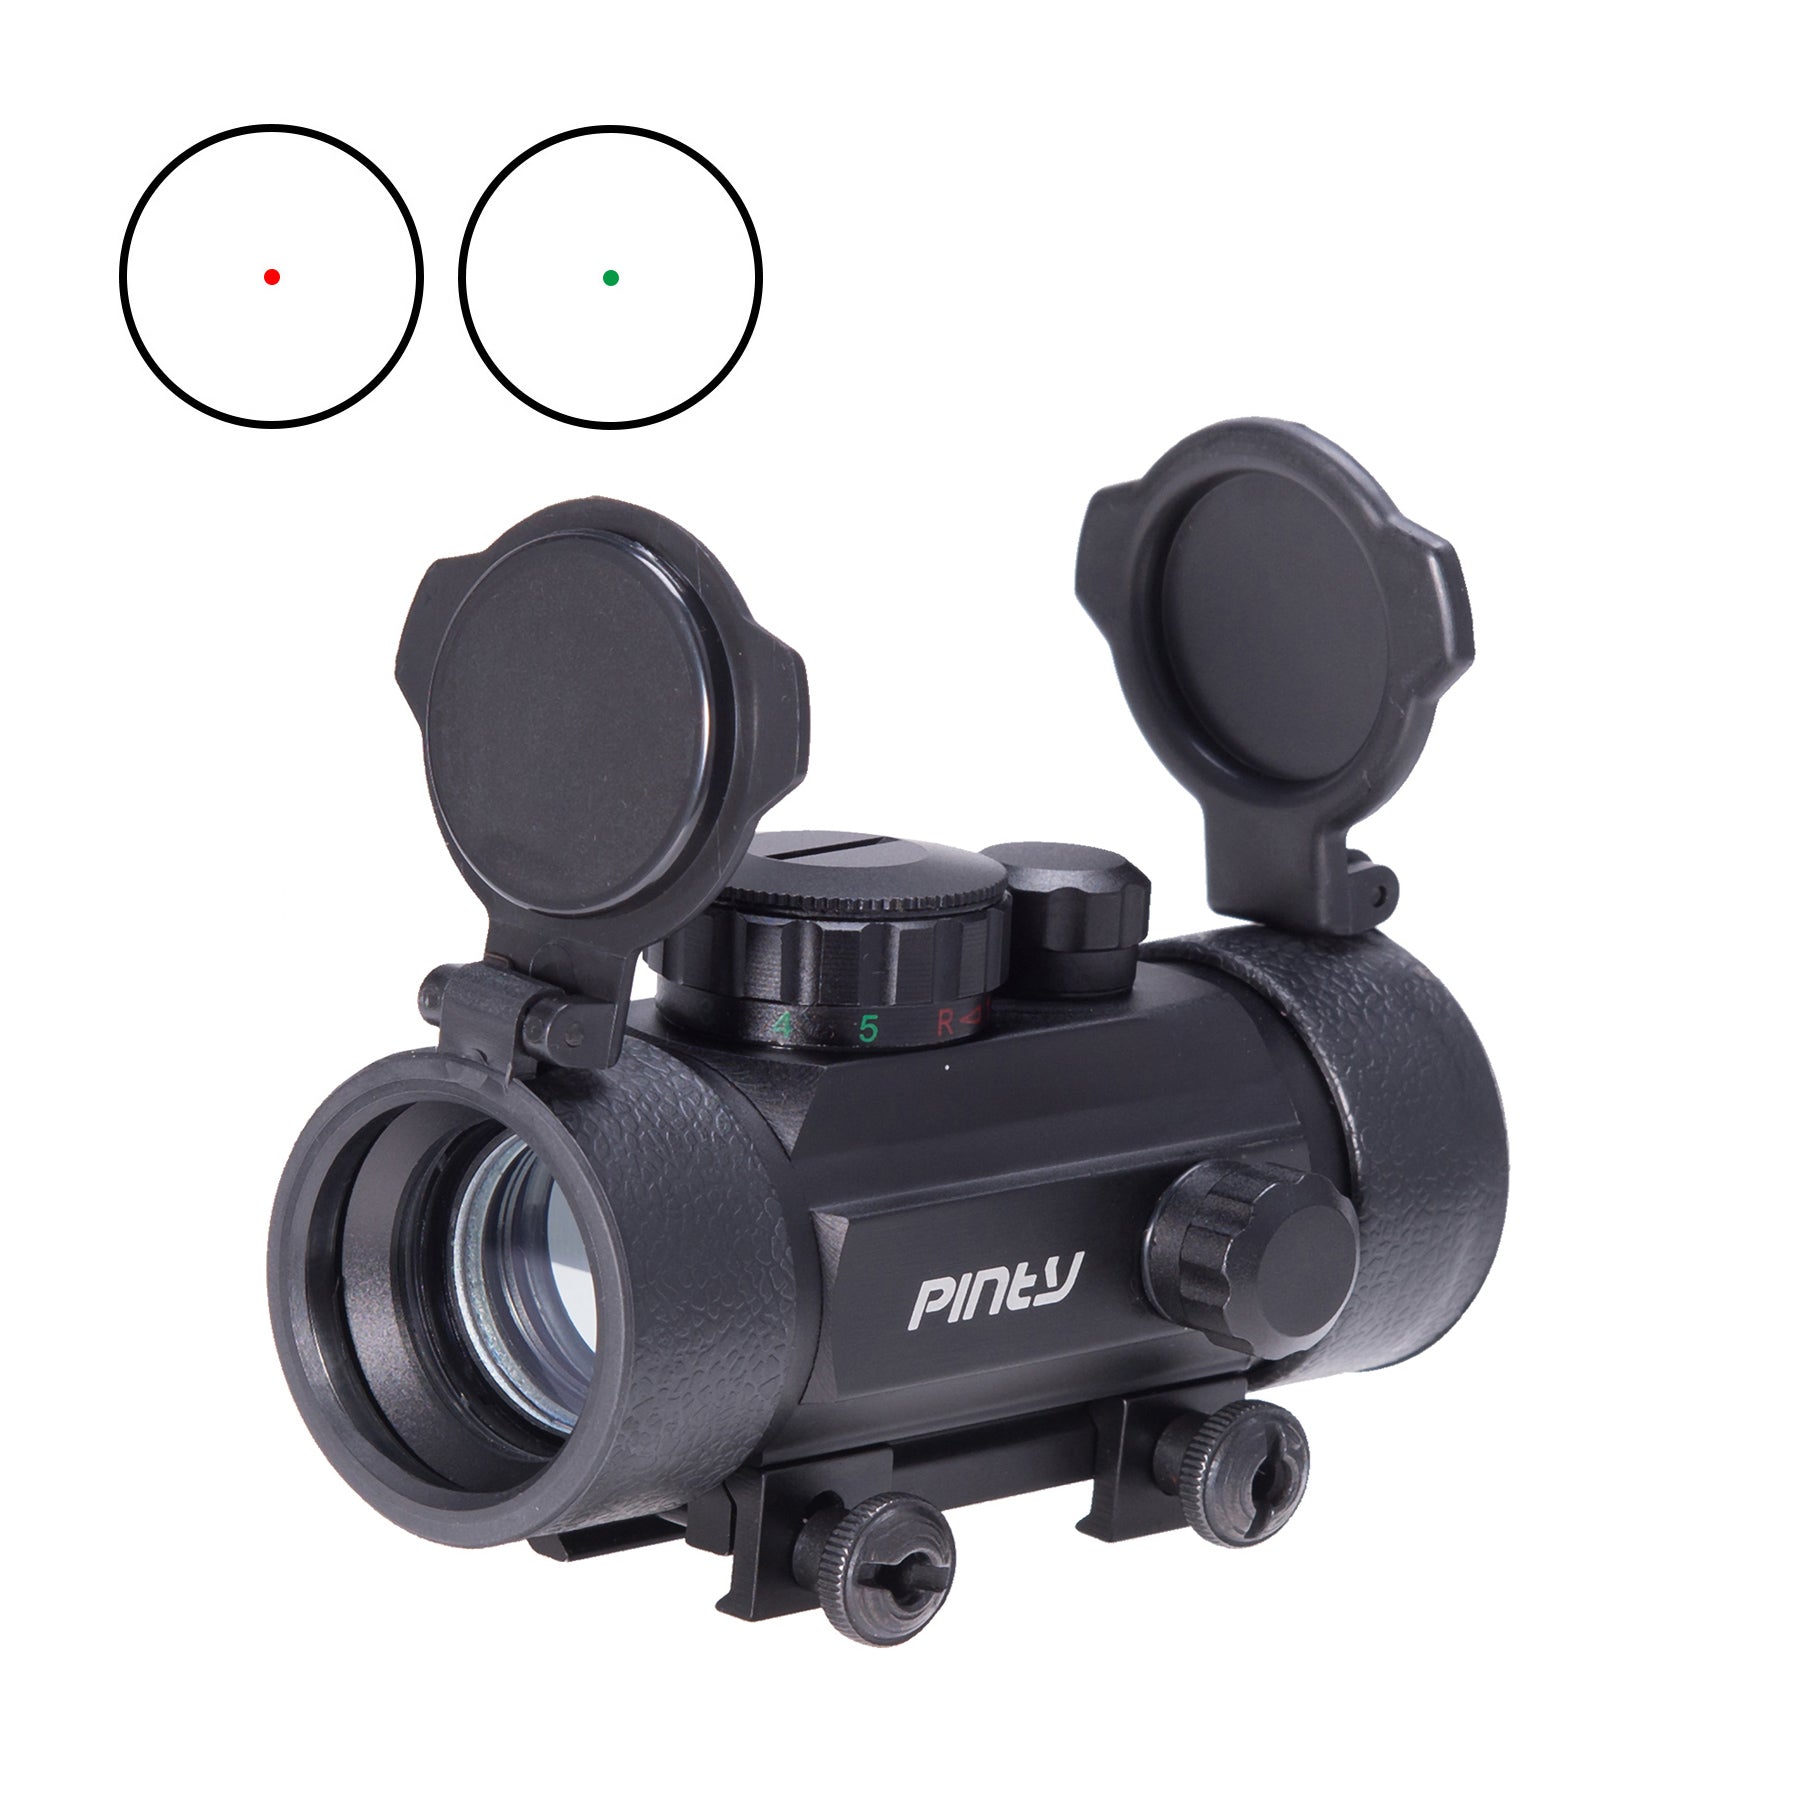 【BUY 1 GET 1 FREE RED DOT GIFT】3-9x42 Mil Dot Tactical Hunting Rifle Scope with Laser